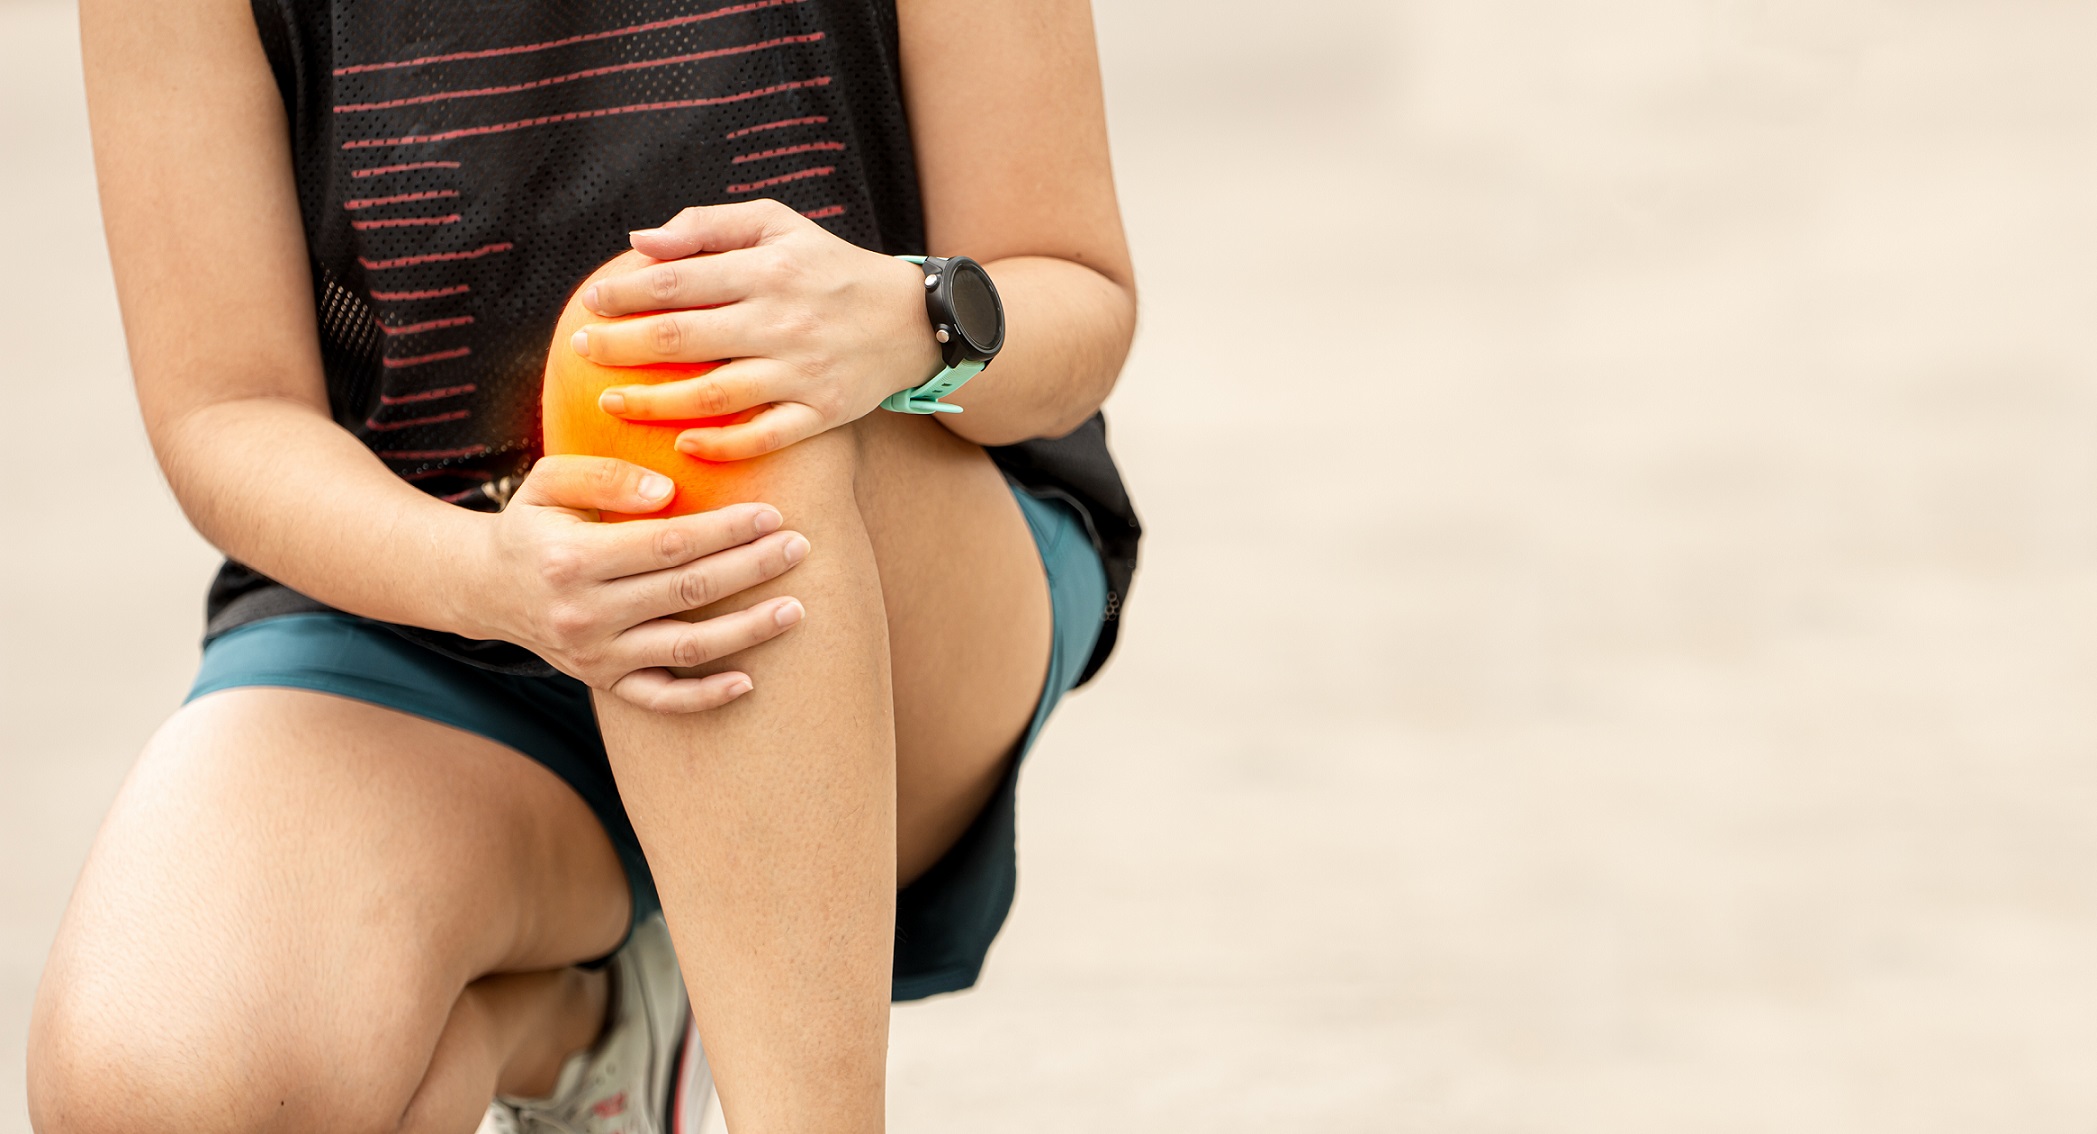 Curcumin Extract Shows Positive Results and Pain-Relief Benefits in Knee Osteoarthritis Trial